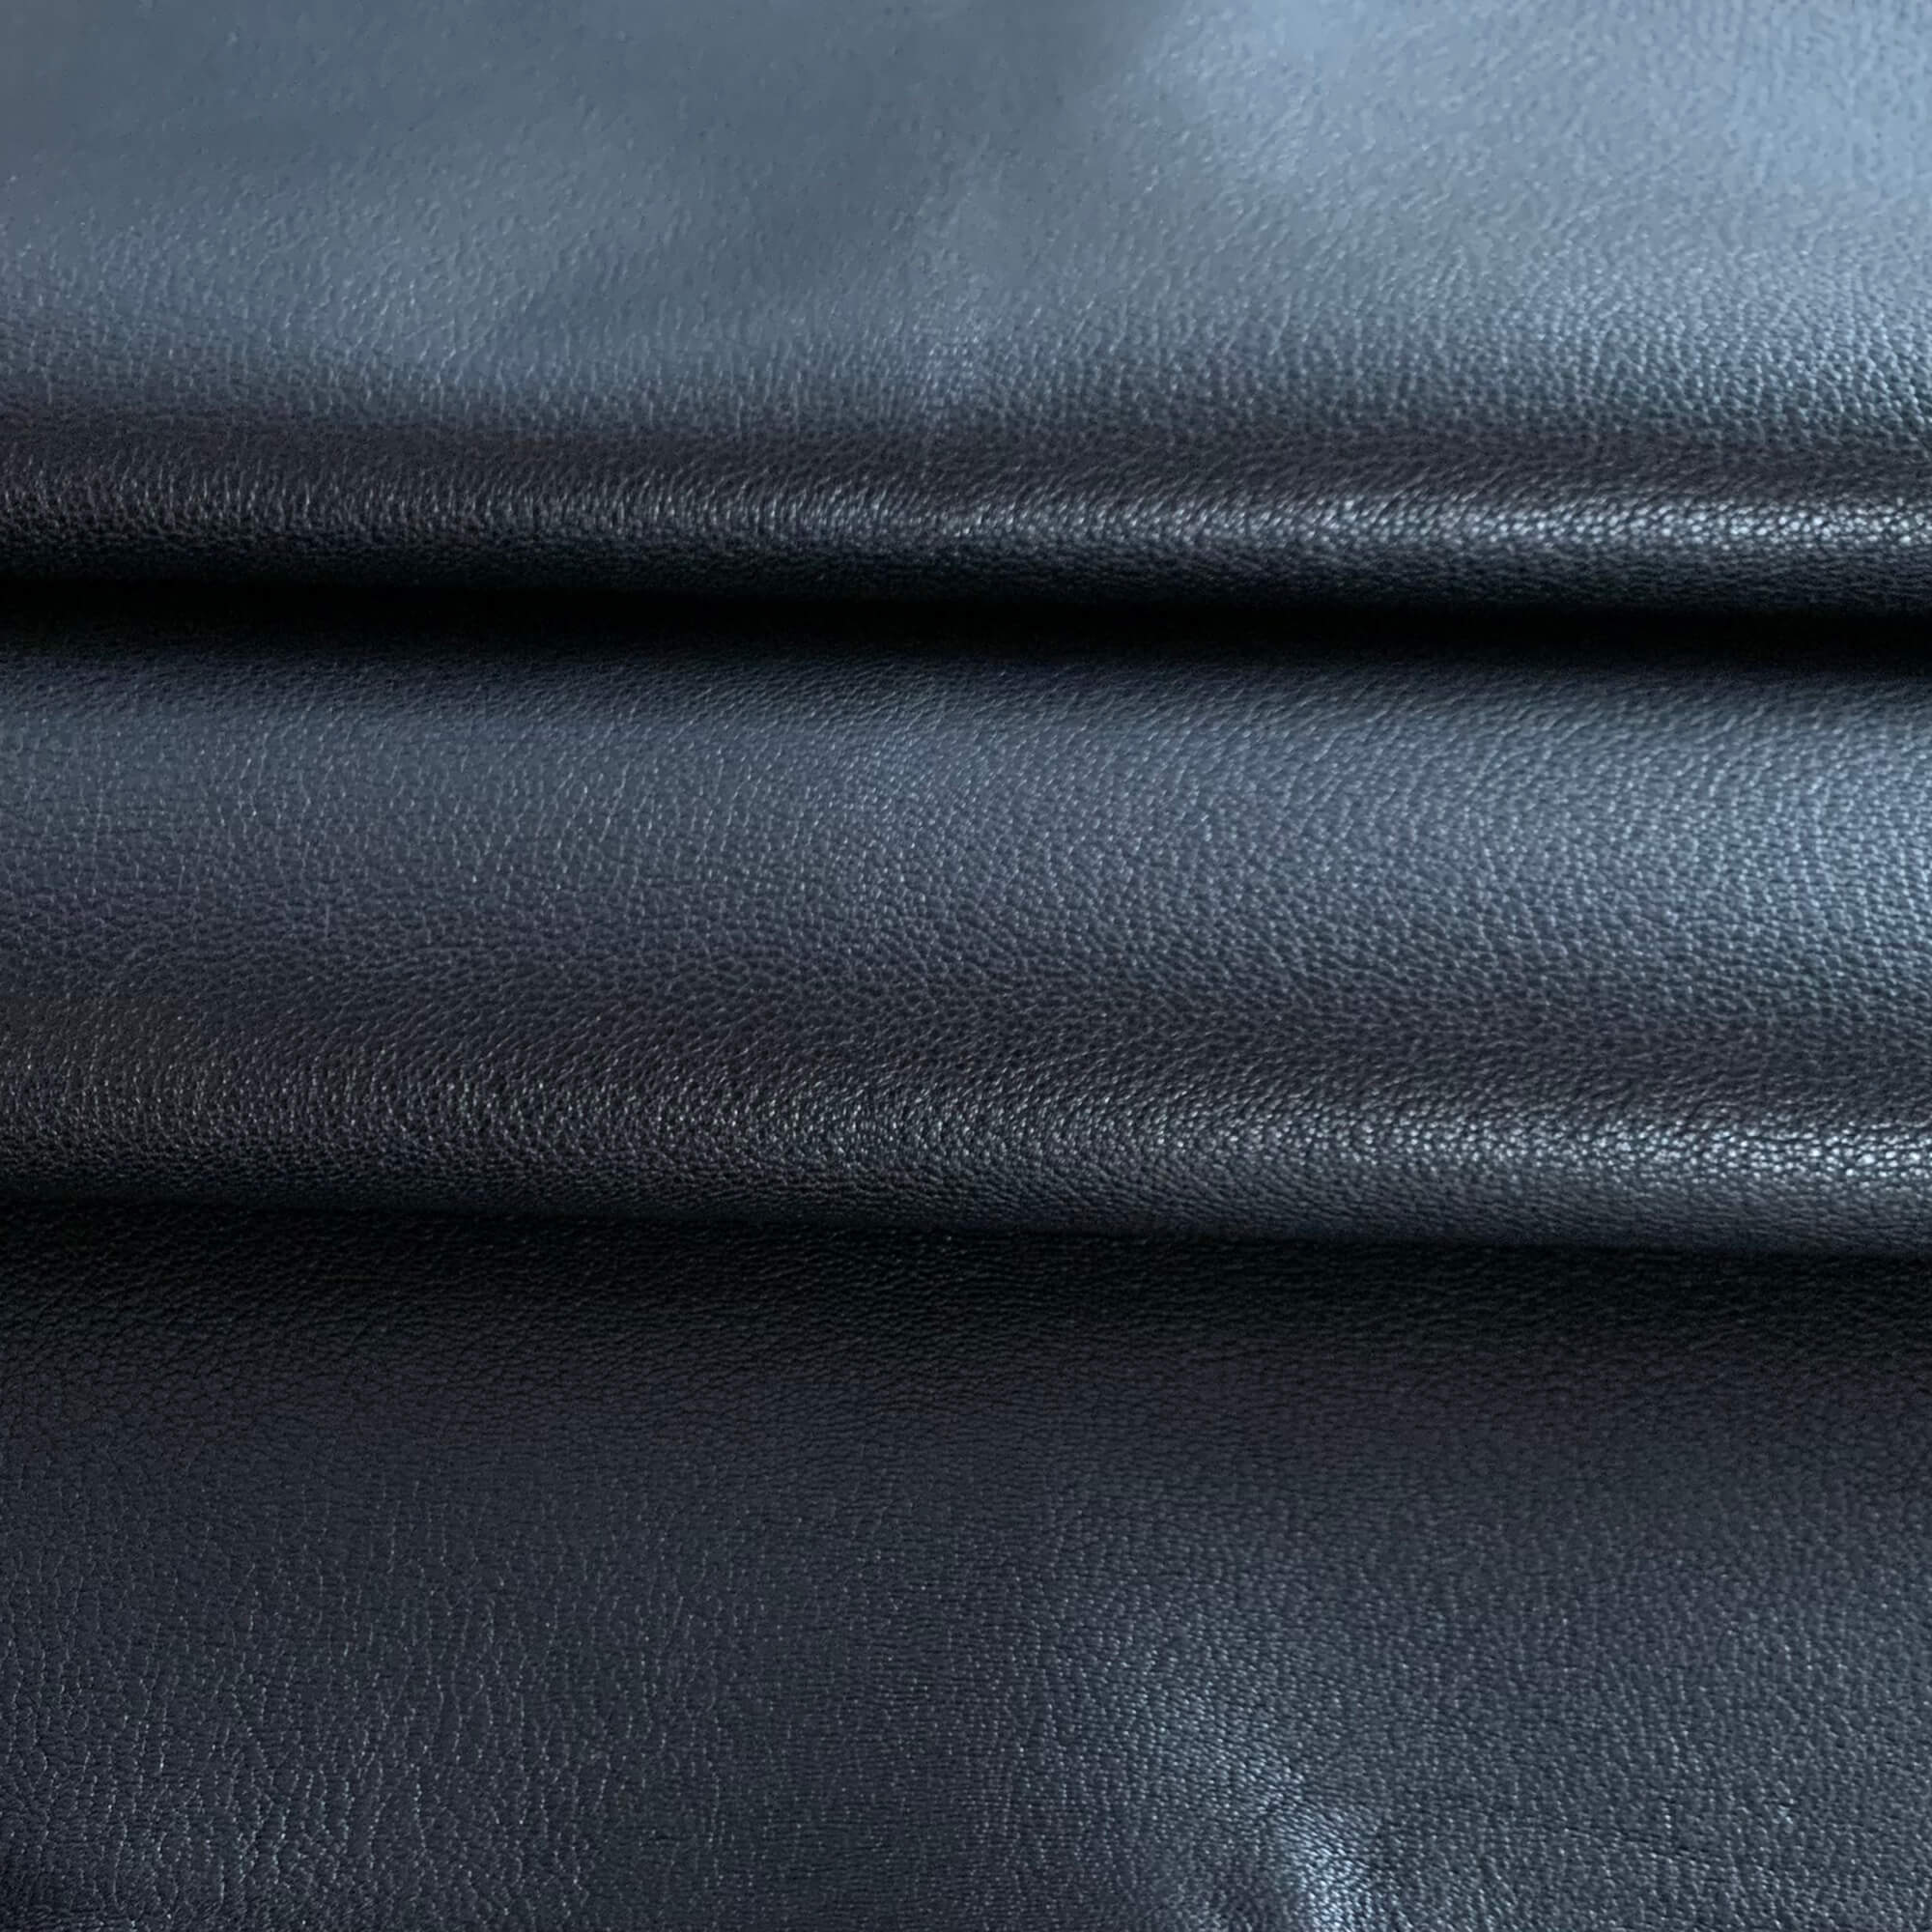 Black Nappa Leather Hides with texture | Blemish Discount